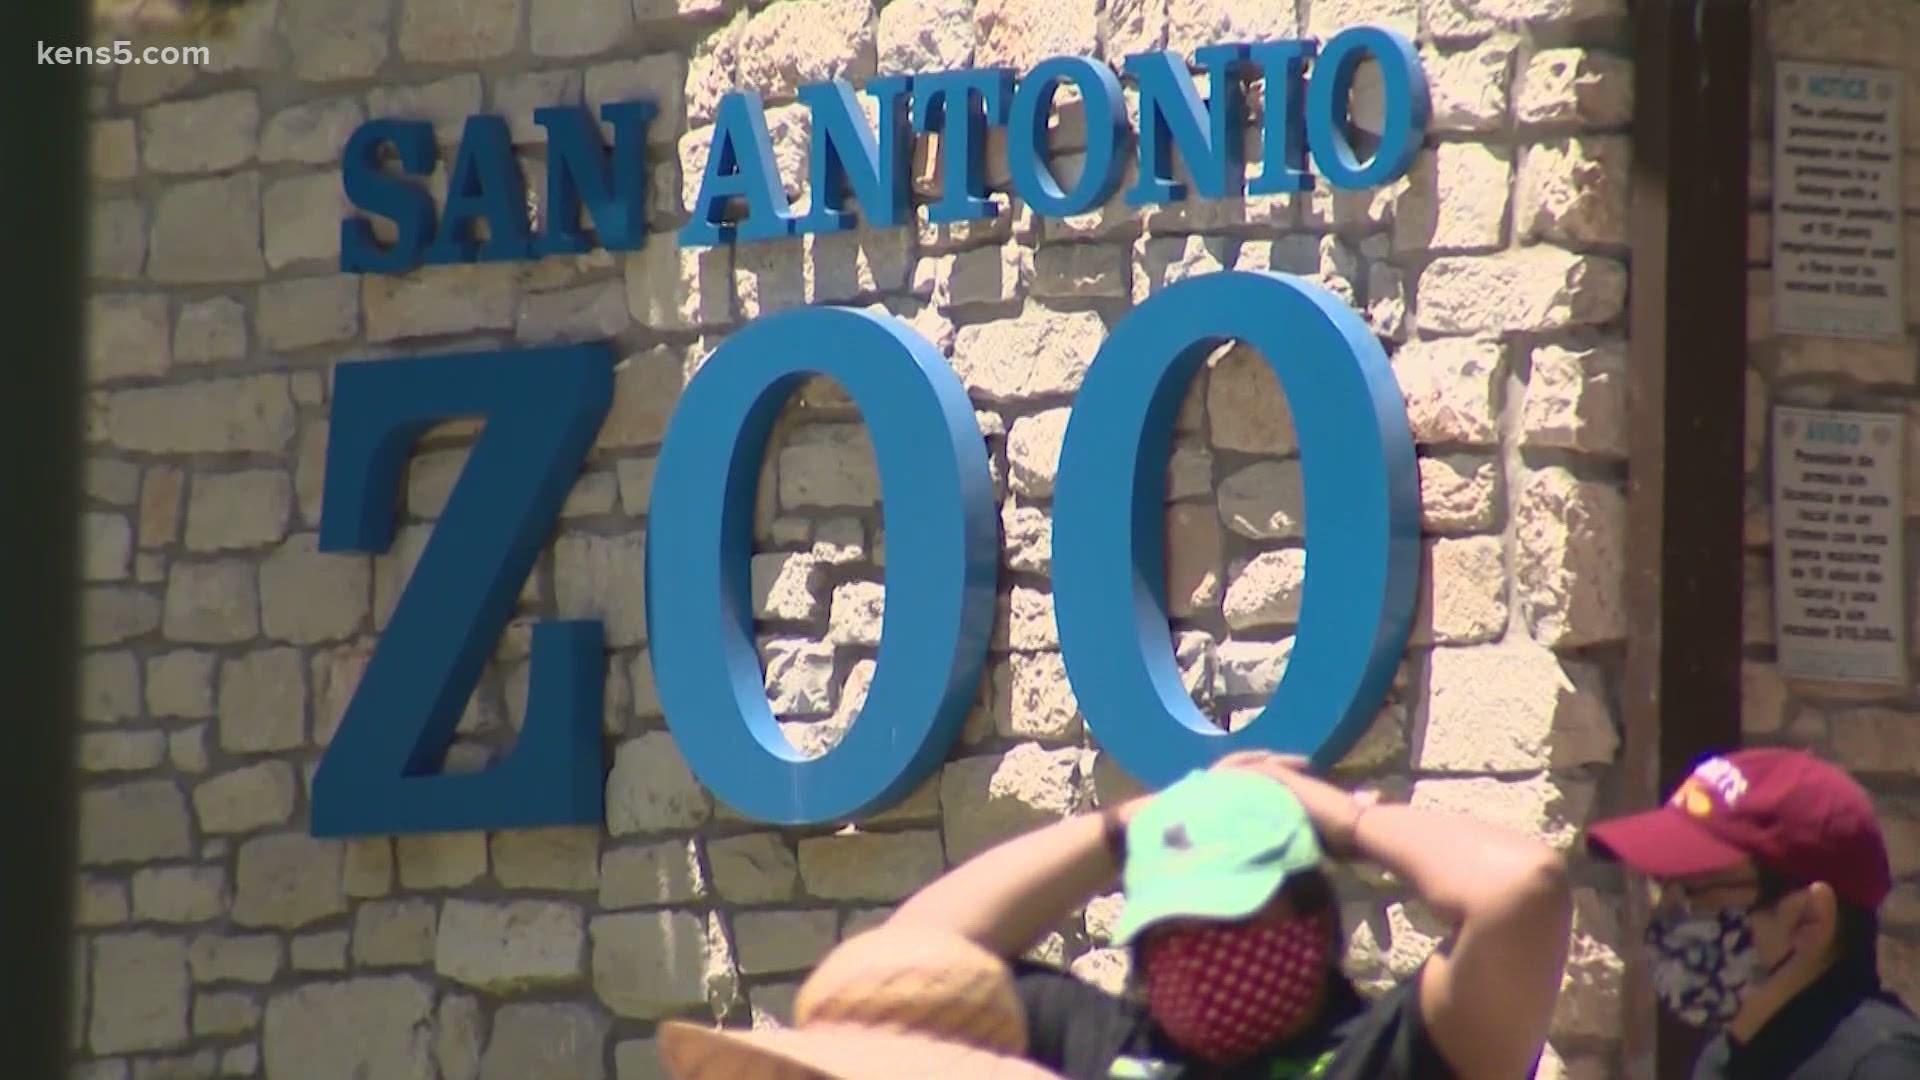 Governor Greg Abbott announced zoos can reopen under Phase II of his plan to reopen the Texas economy.